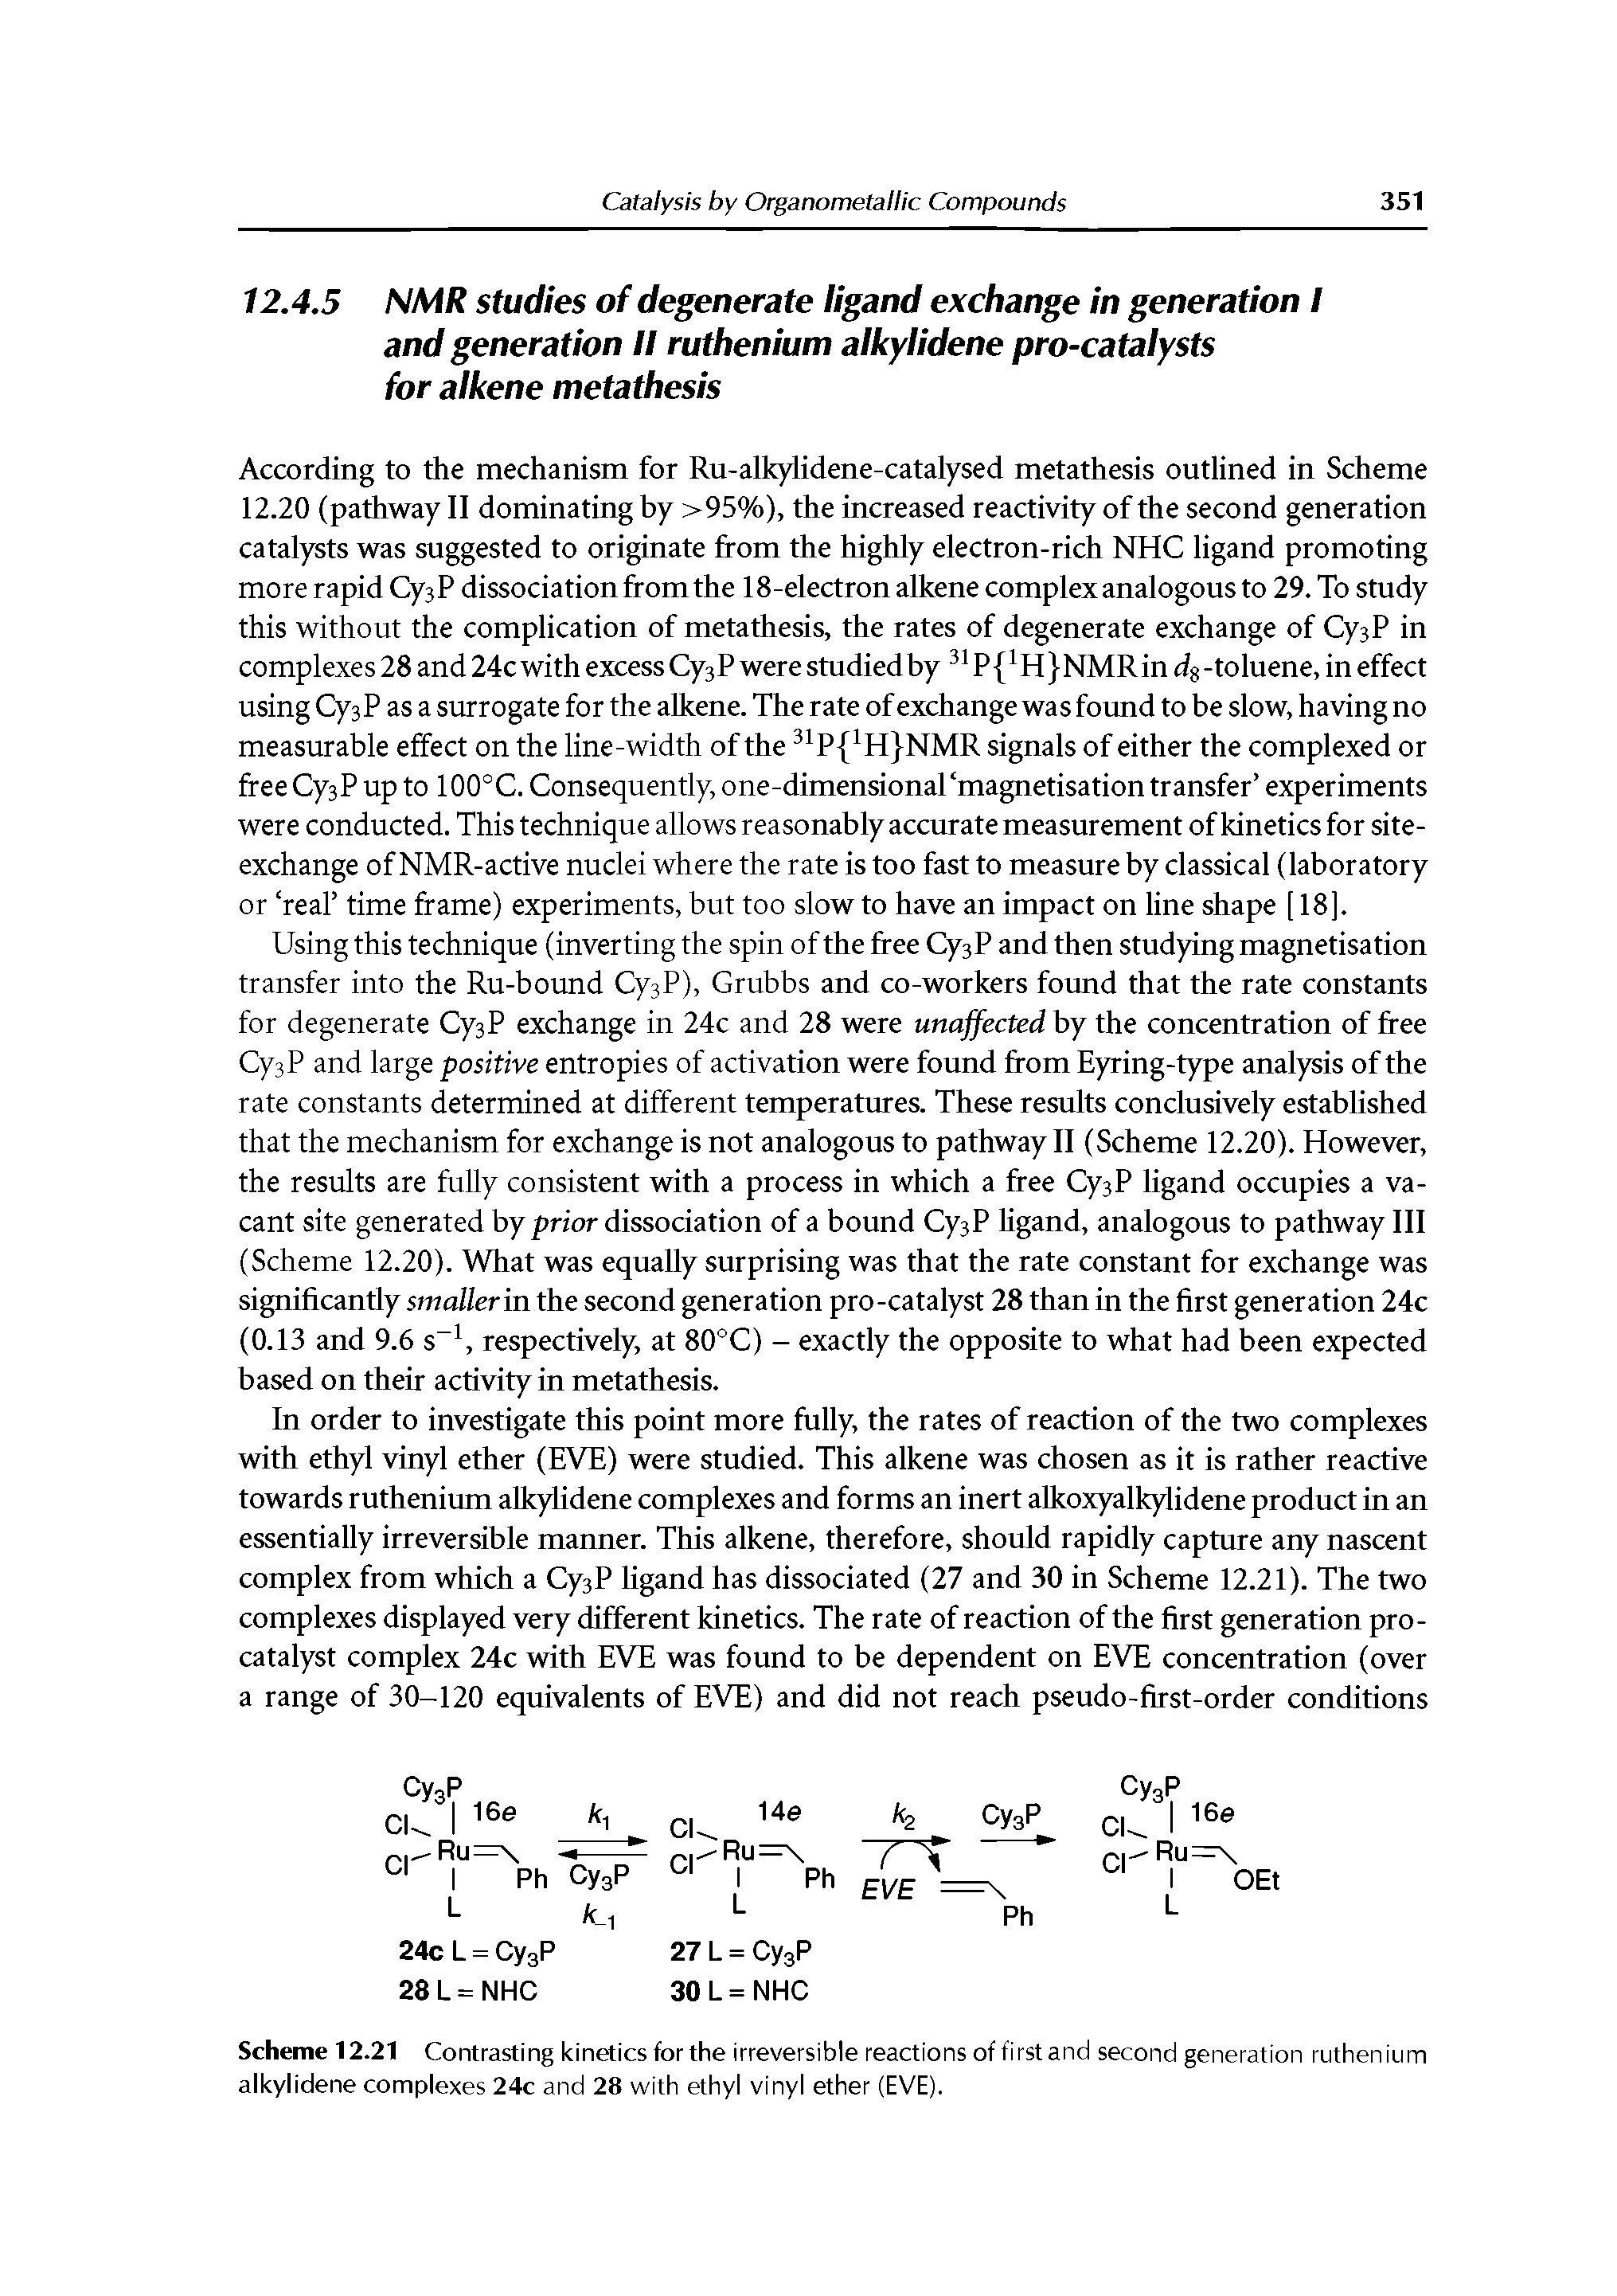 Scheme 12.21 Contrasting kinetics for the irreversible reactions of first and second generation ruthenium alkylidene complexes 24c and 28 with ethyl vinyl ether (EVE).